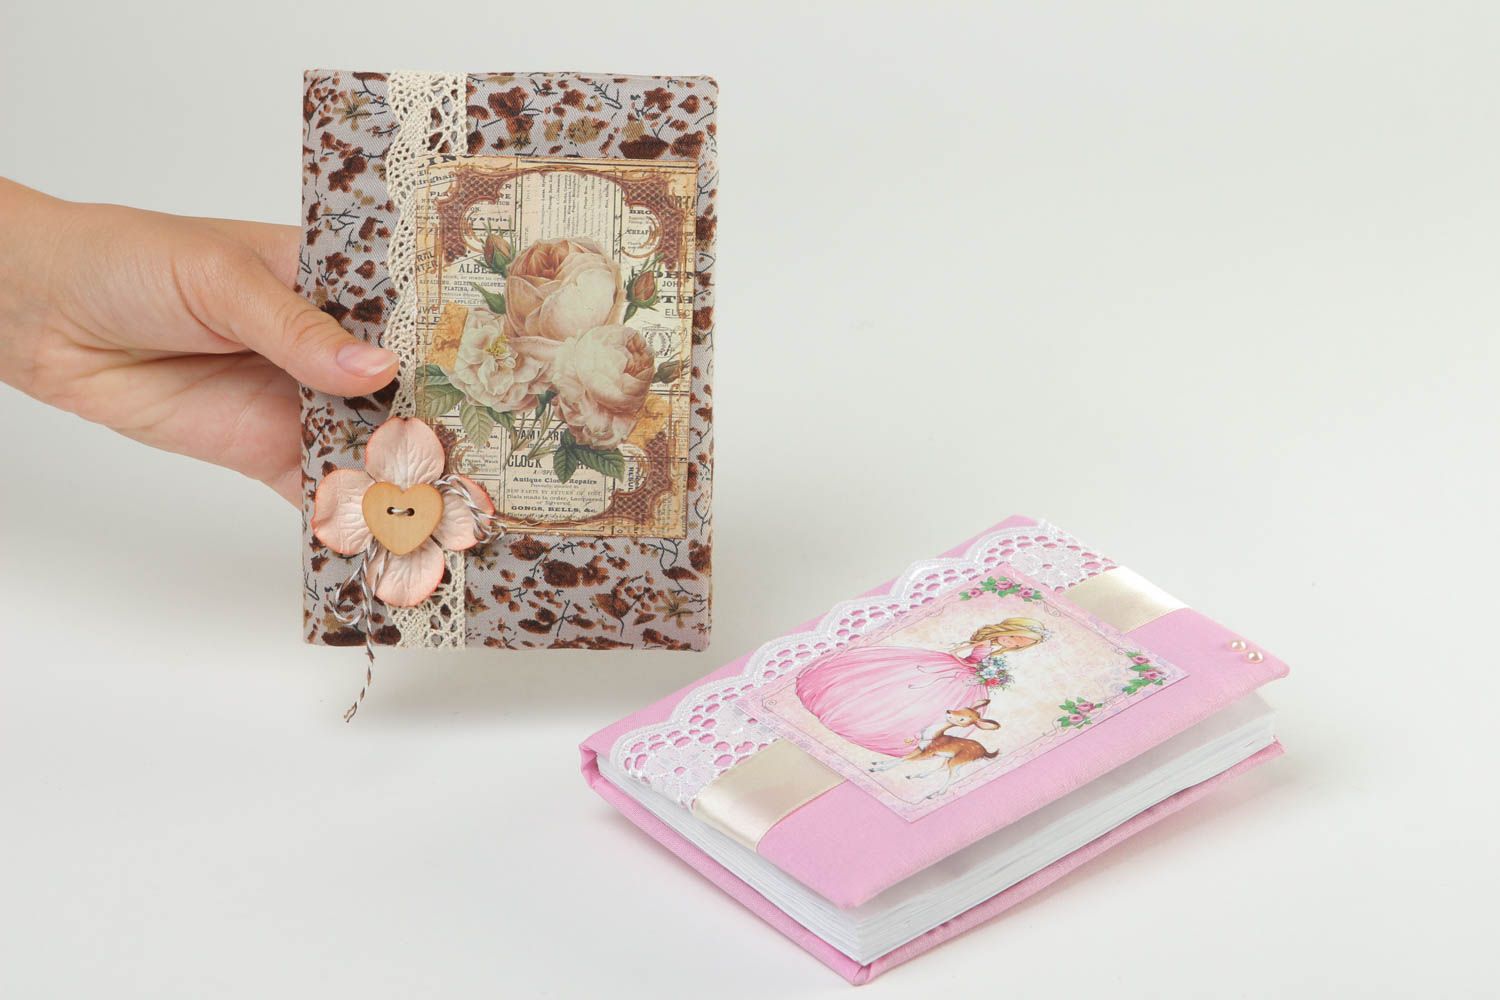 Unusual handmade notebook scrapbooking ideas notebooks and daily logs gift ideas photo 5